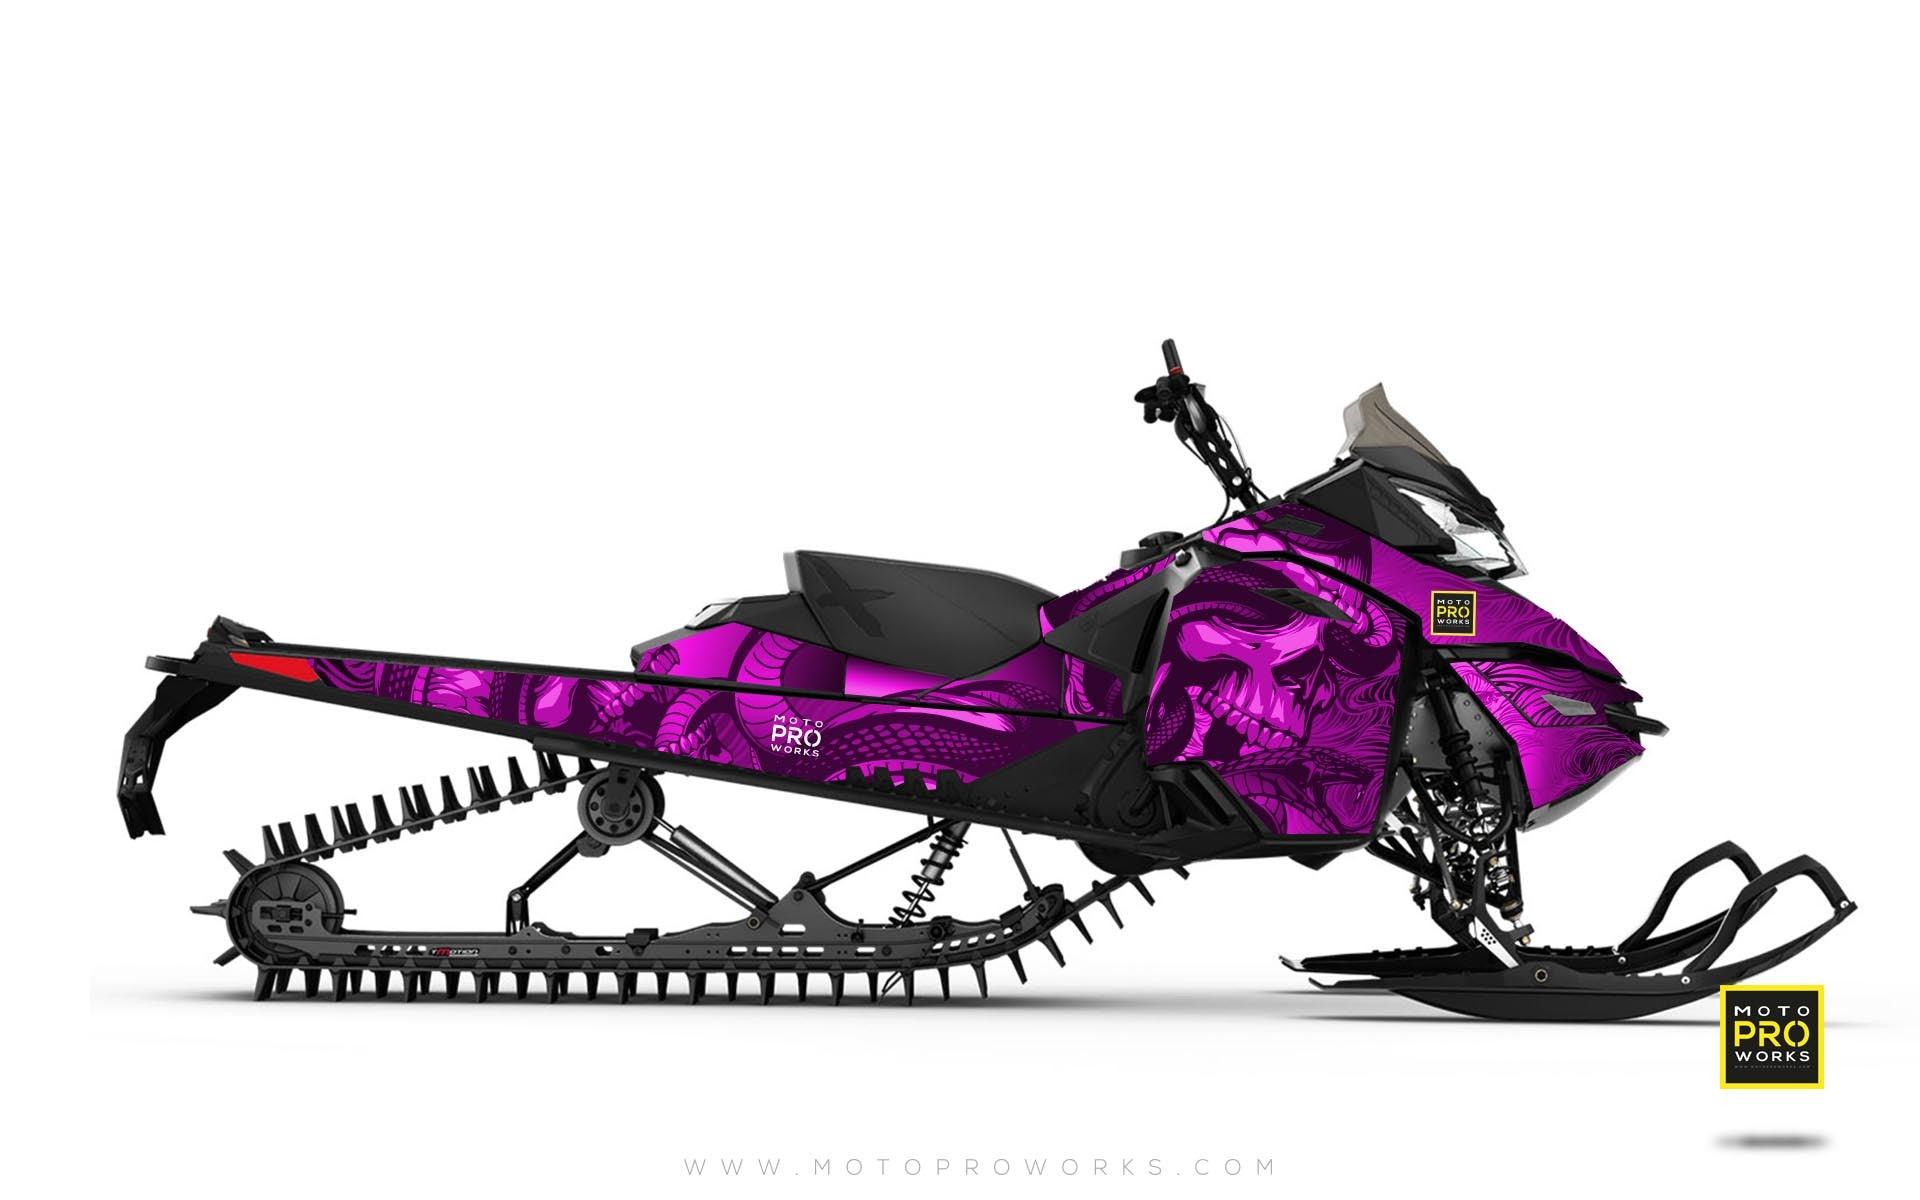 Ski-Doo Graphics - "Ssskully" (pink) - MotoProWorks | Decals and Bike Graphic kit